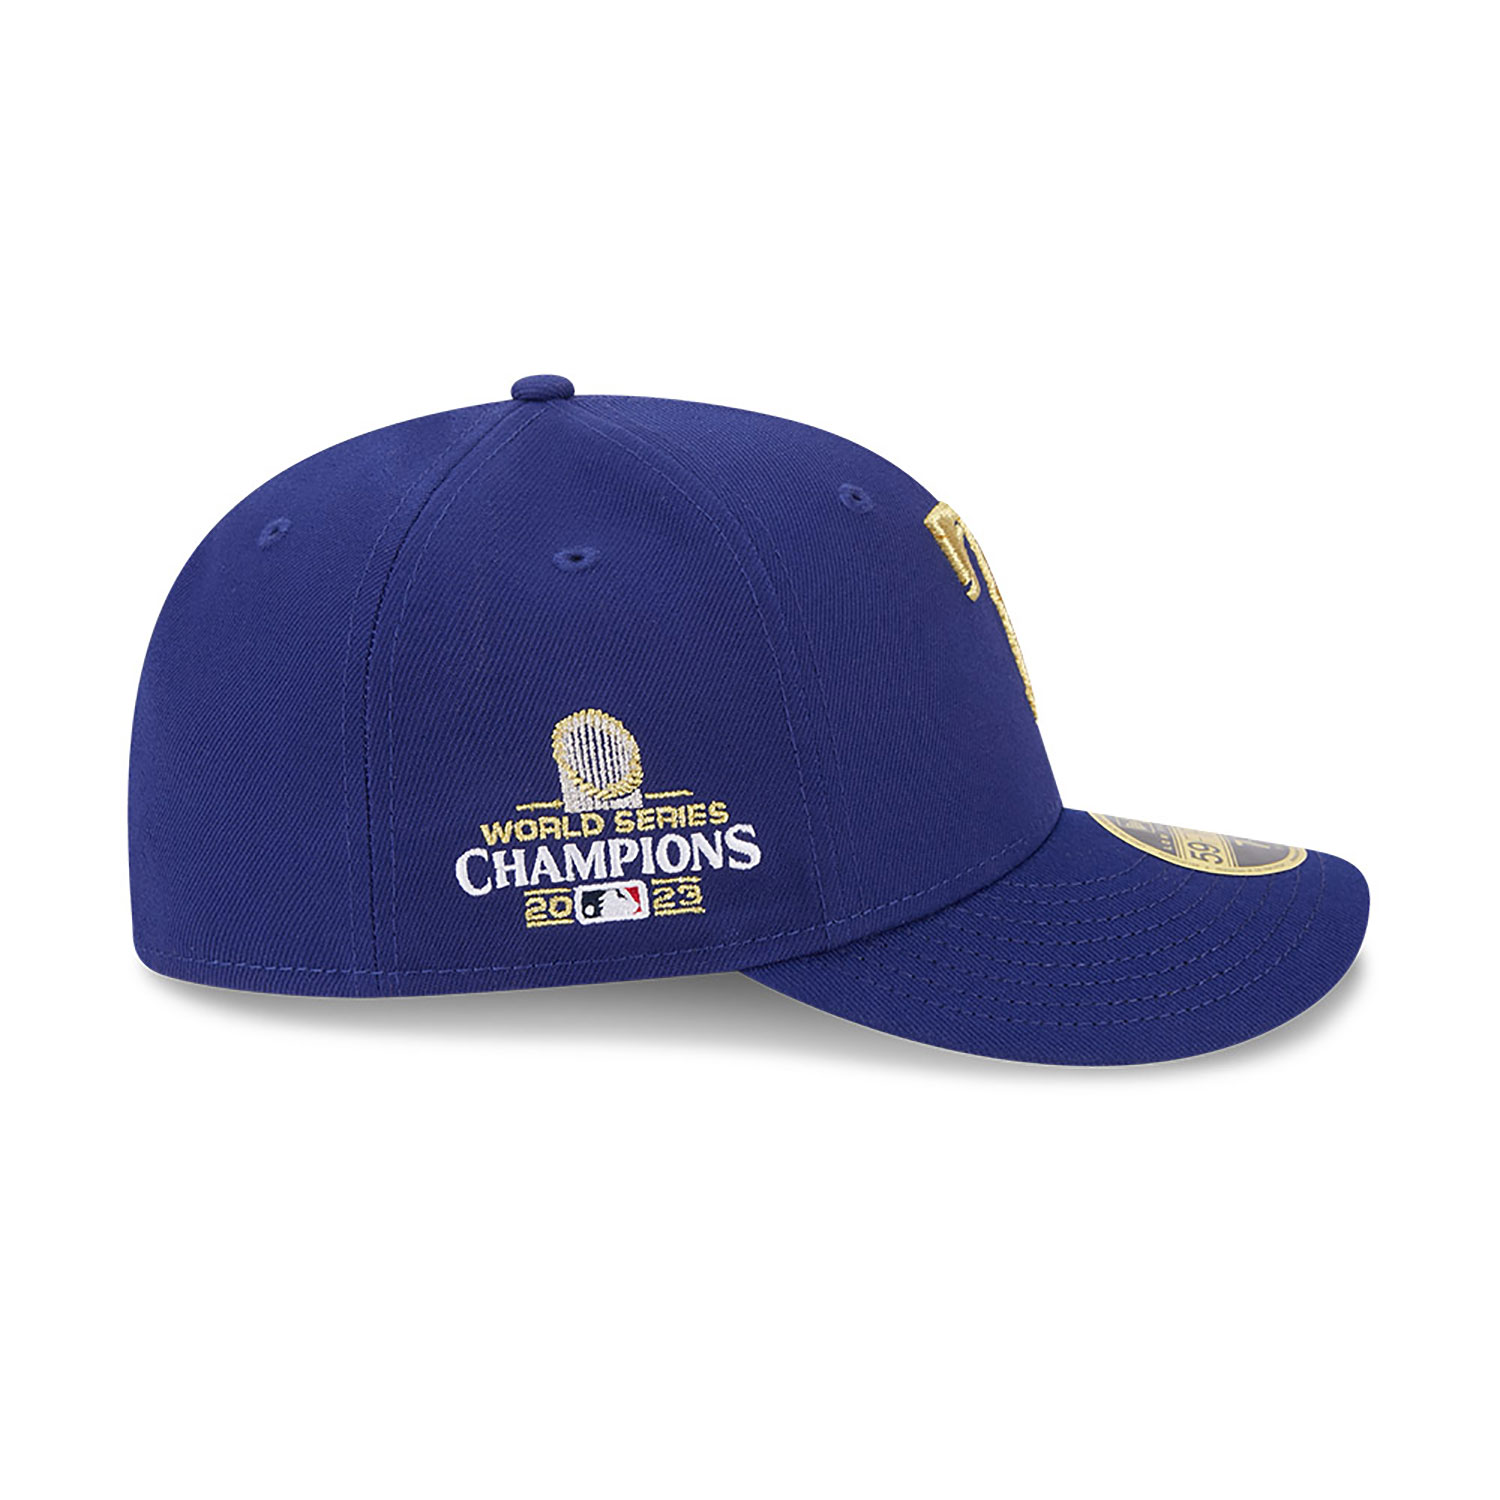 Texas Rangers MLB Gold Dark Blue Low Profile 59FIFTY Fitted Cap